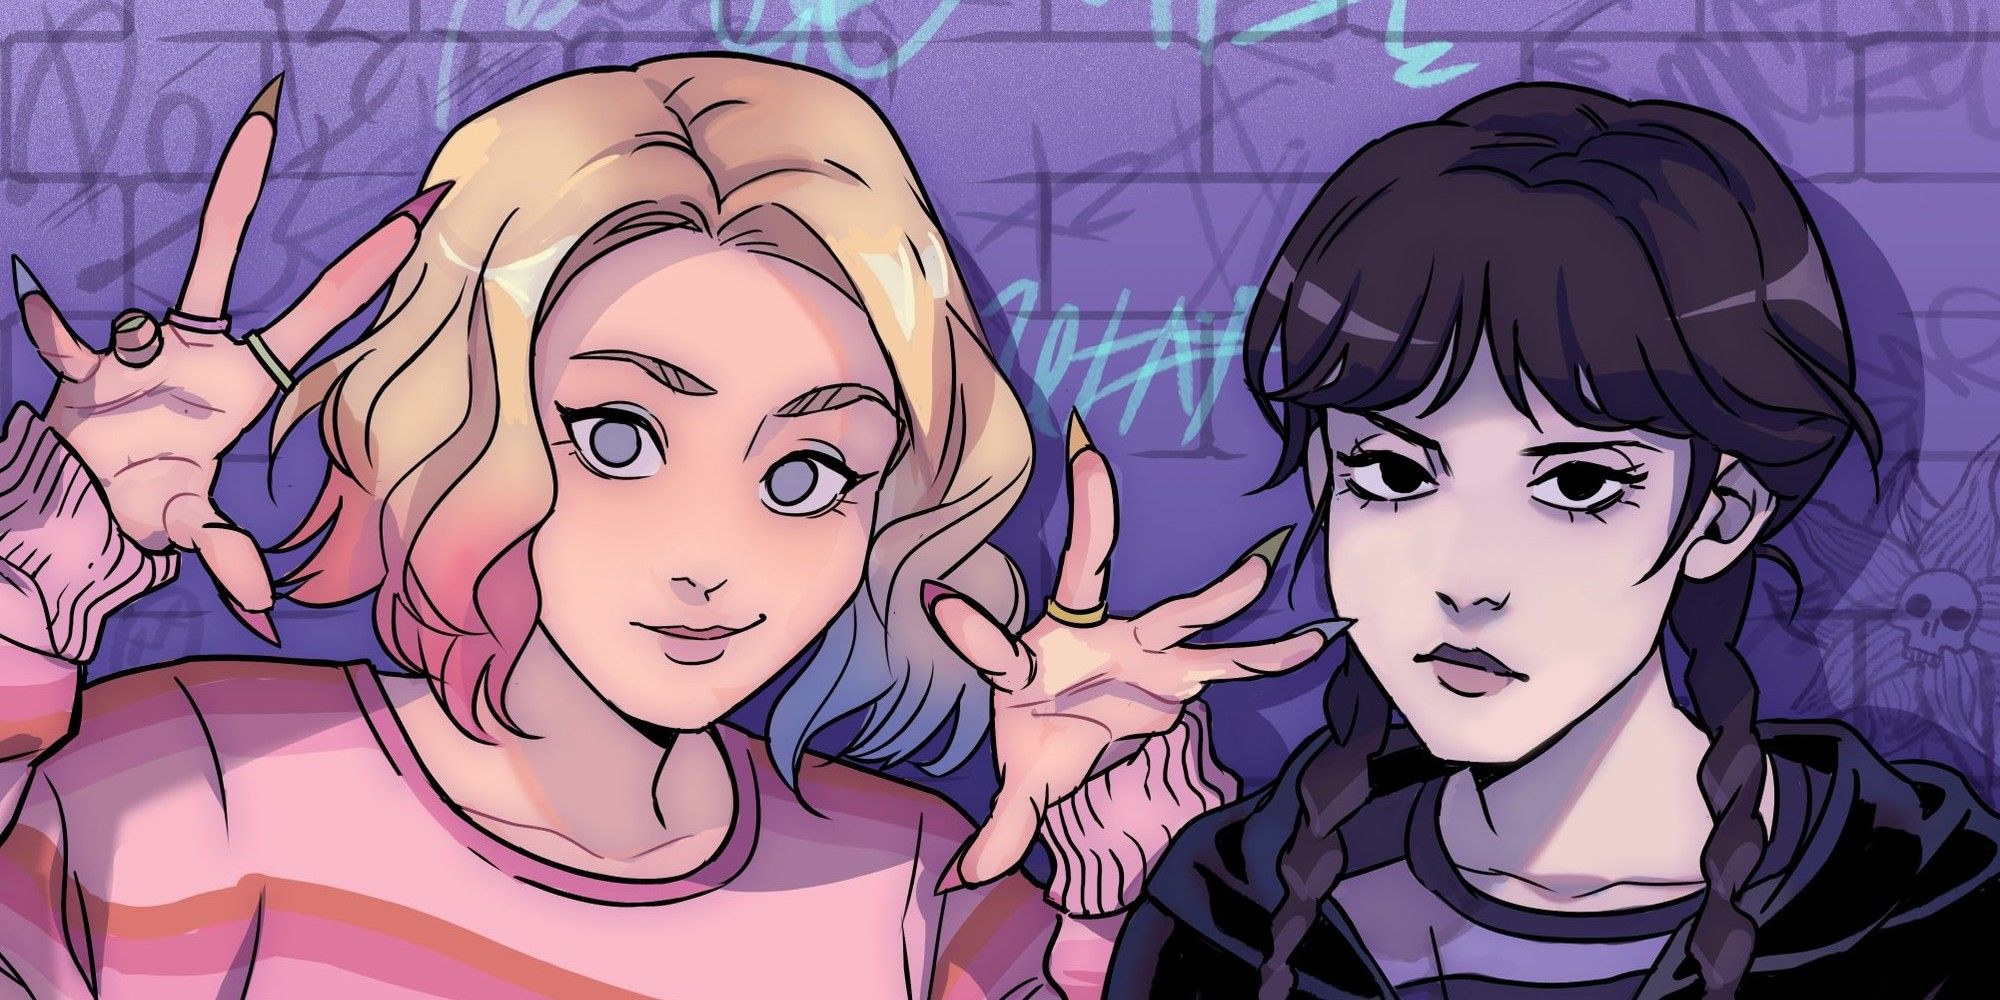 Wednesday and Enid's Relationship Is Perfectly Captured in Fan Art